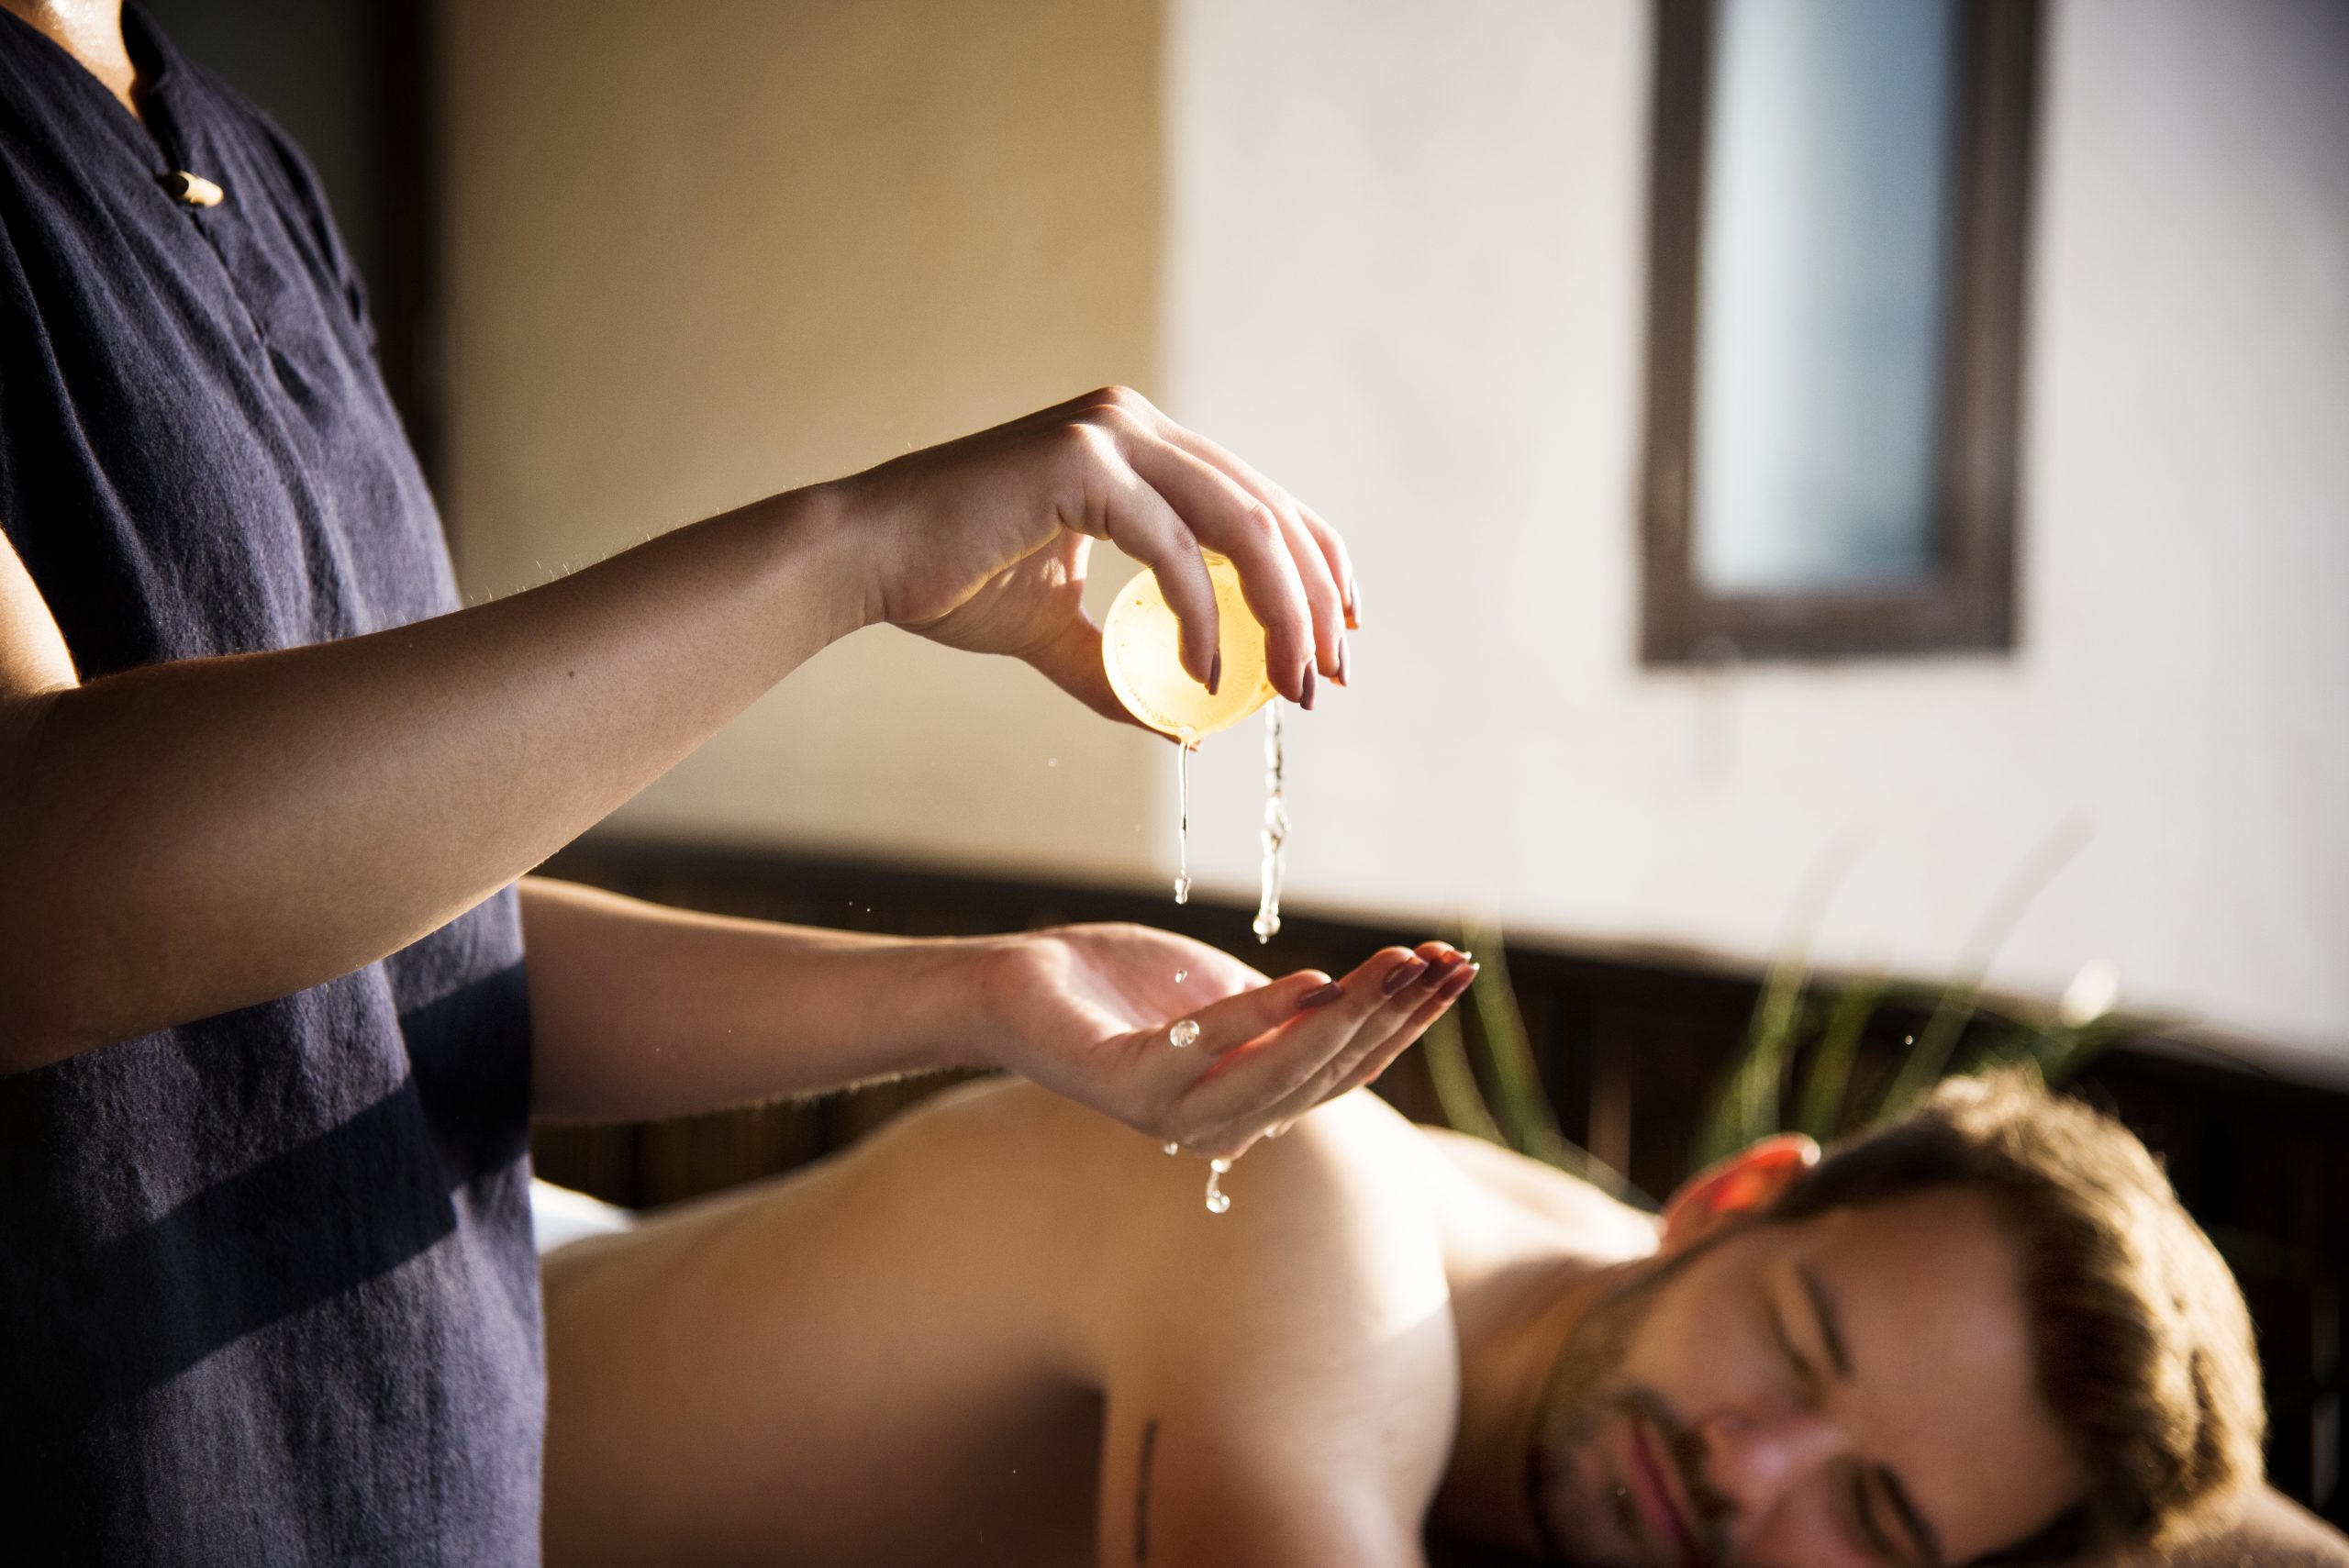 Basic types of massage: Which is right for you?